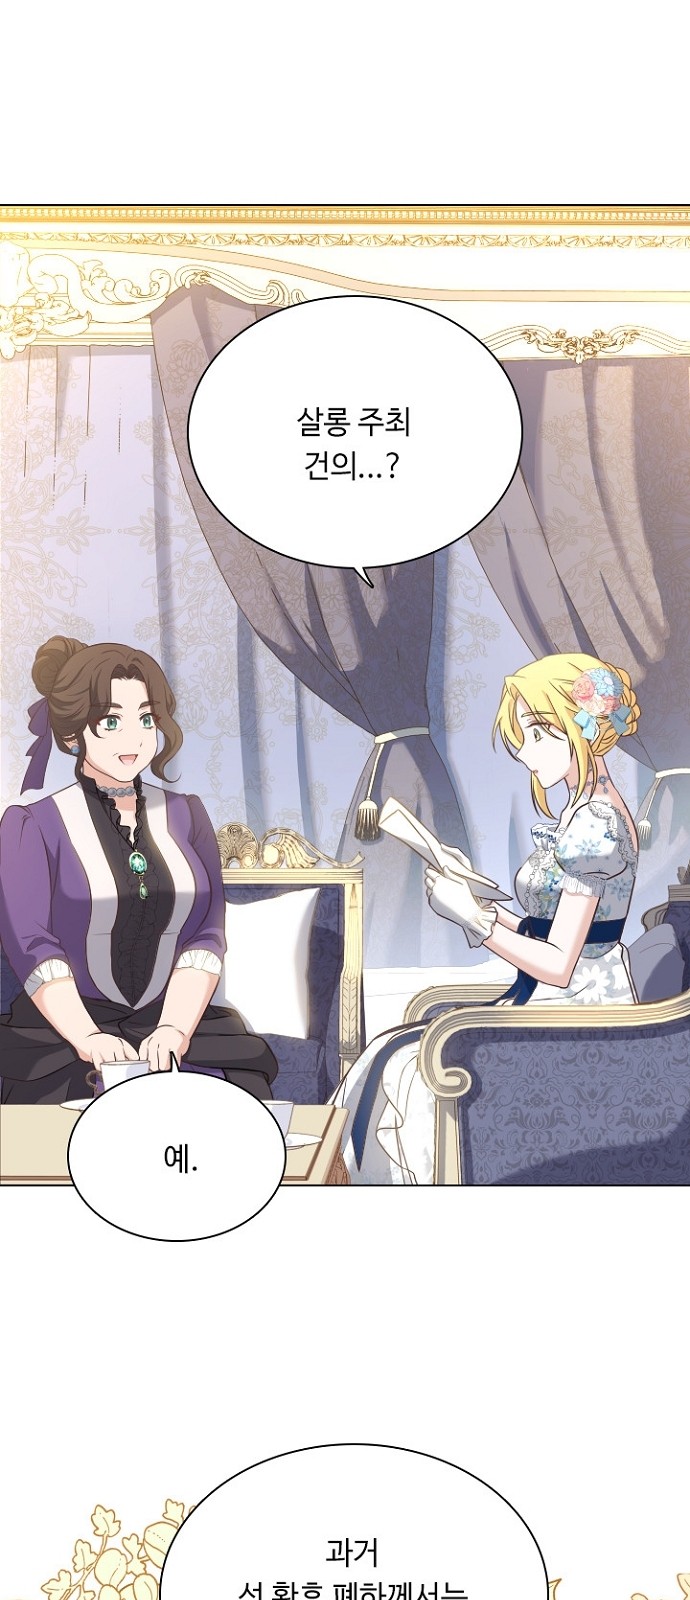 His Majesty's Proposal (A Night With the Emperor) - Chapter 42 - Page 1